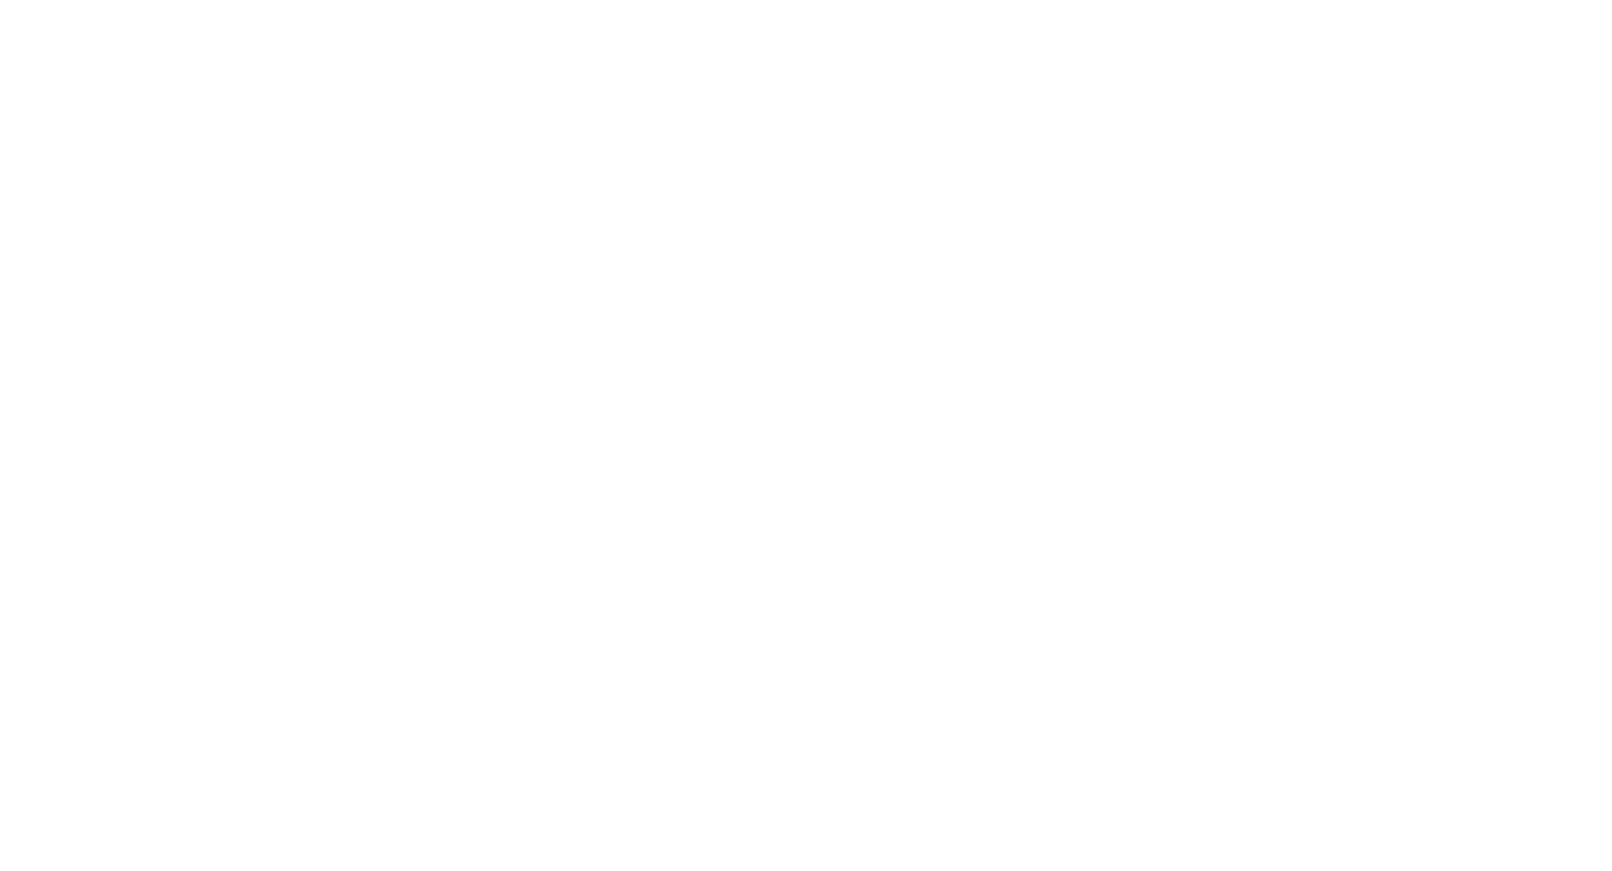 MDO - LABEL PRIVACY PROTECTION